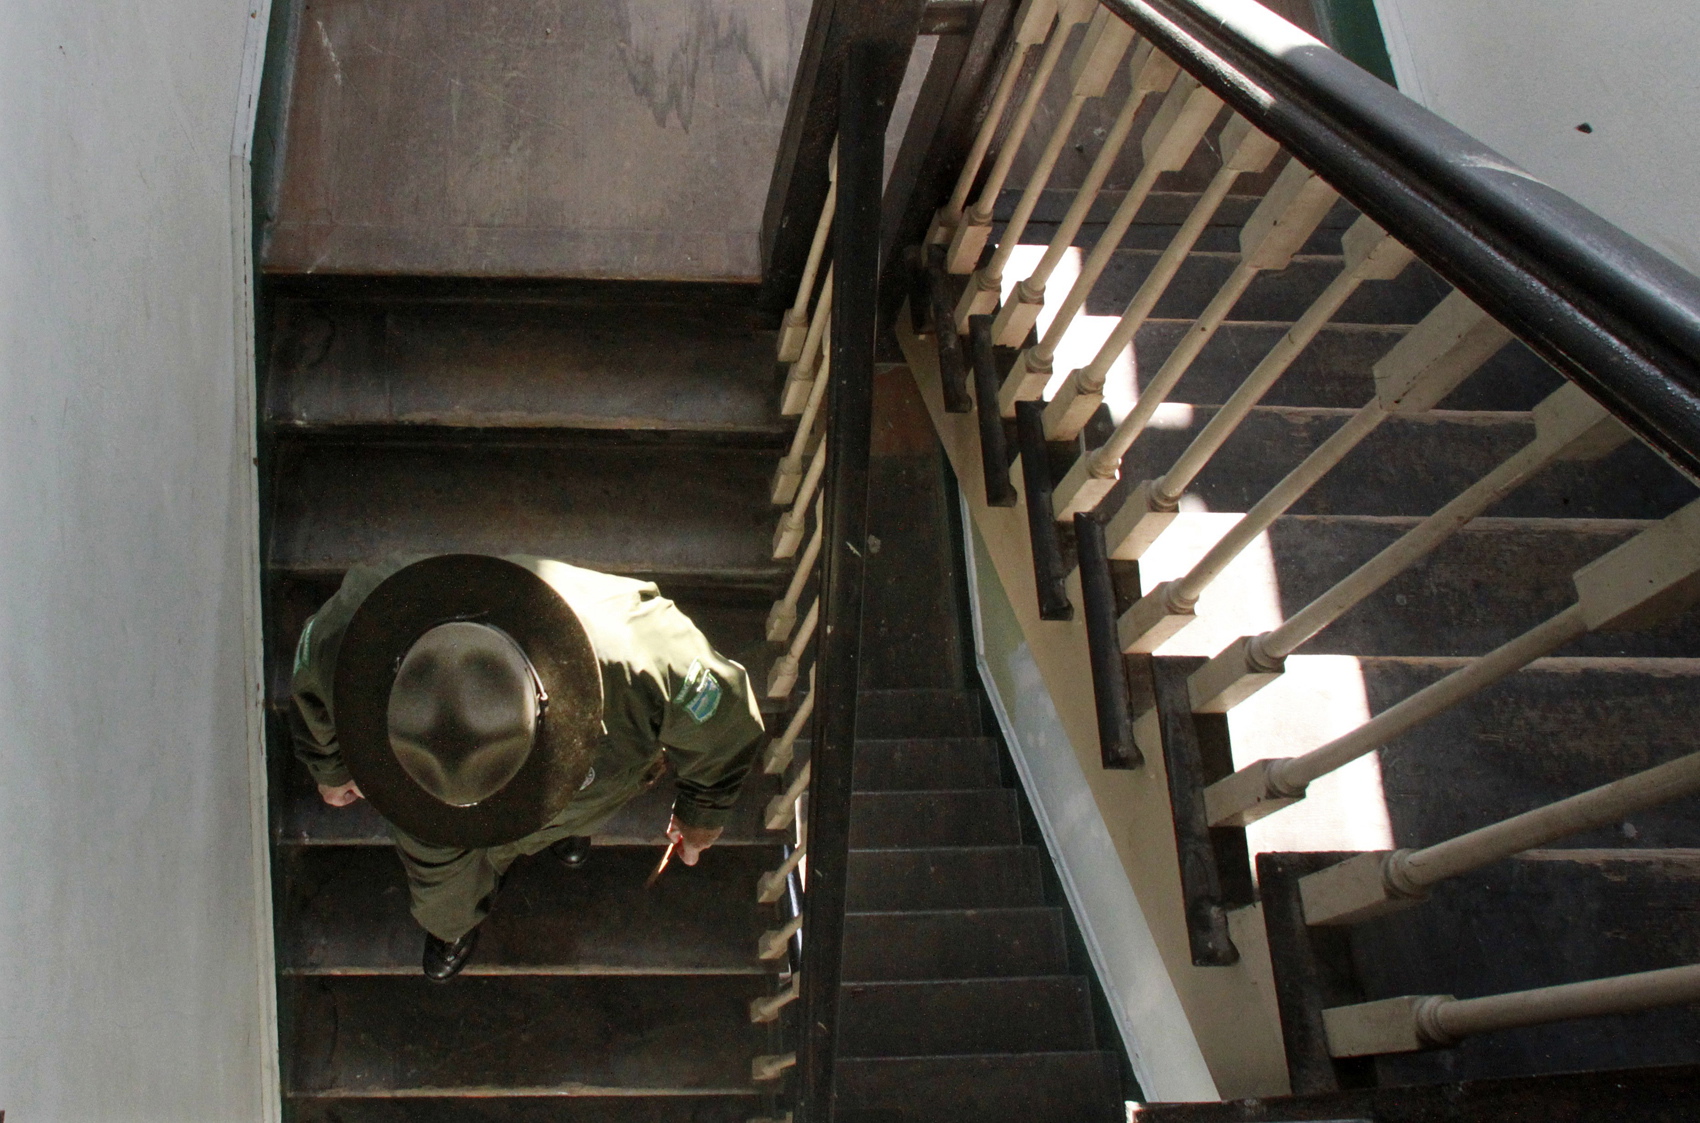 Photos by Alan Berner/The Seattle Times
Park ranger Mike Zimmerman descends a stairway in the old Army hospital at Fort Flagler in Nordland. Restoration of the interior began in 2005 by the Friends of Fort Flagler, and now the first floor with kitchen, ballroom and more is available for events.